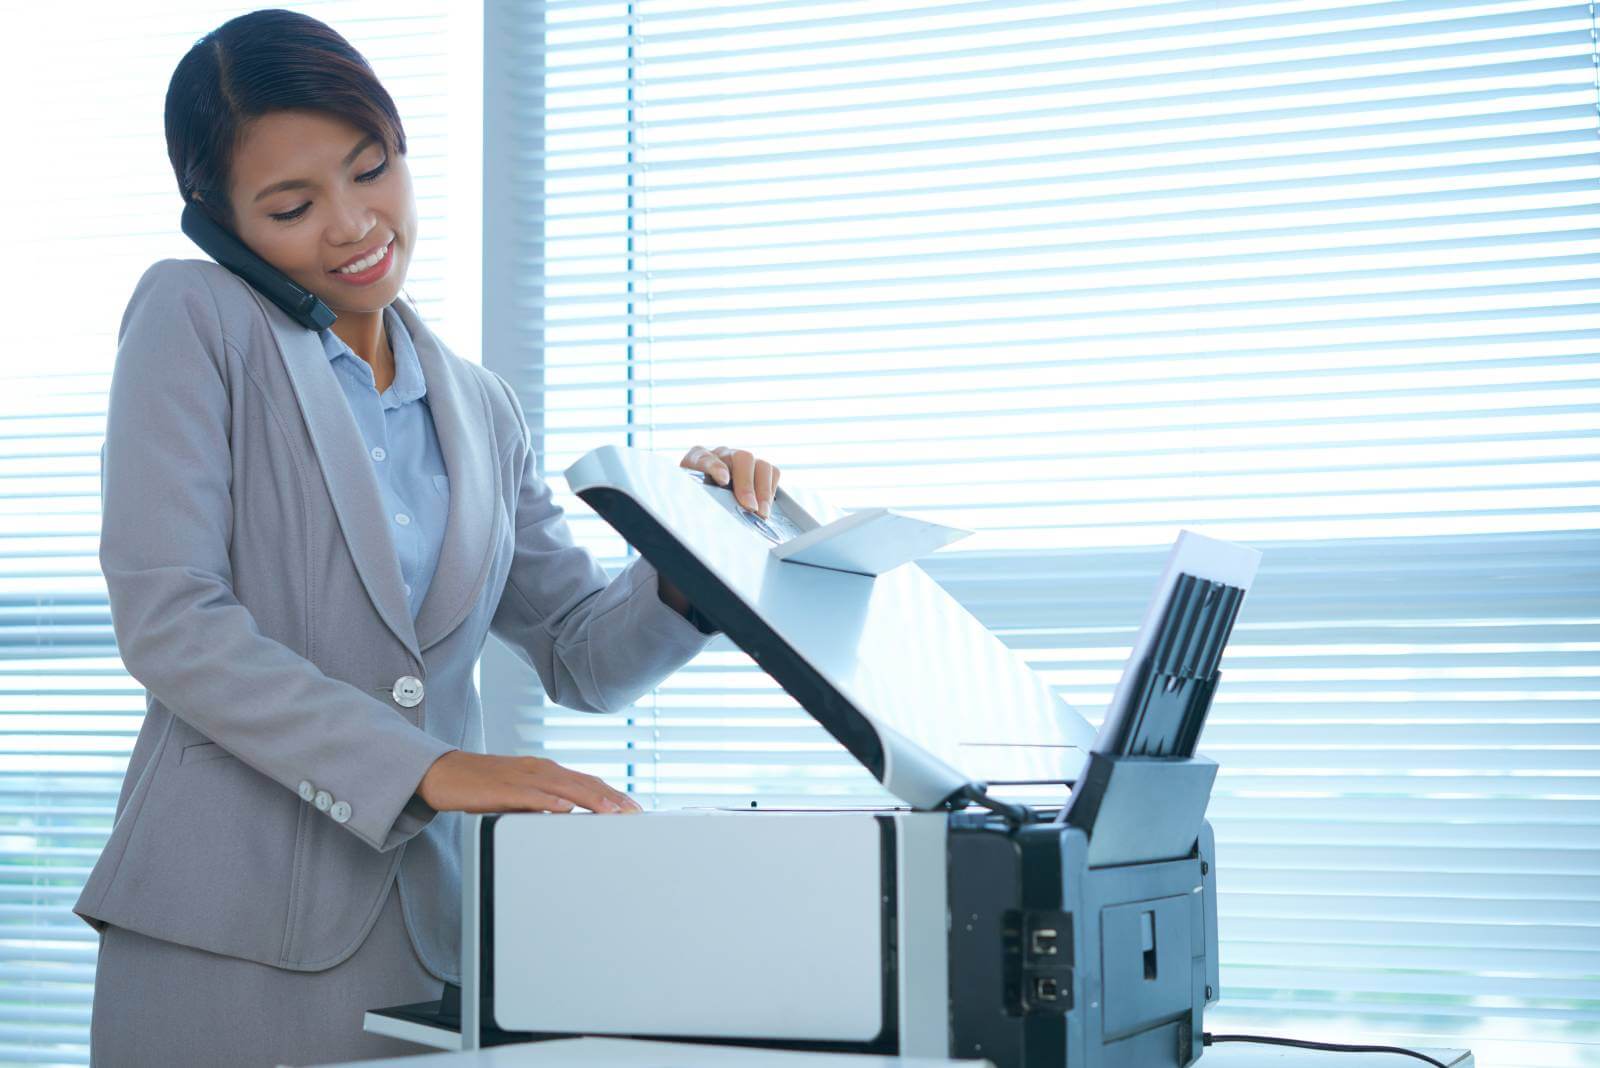 Functioning Copier Machines - Clear Choice Technical Services